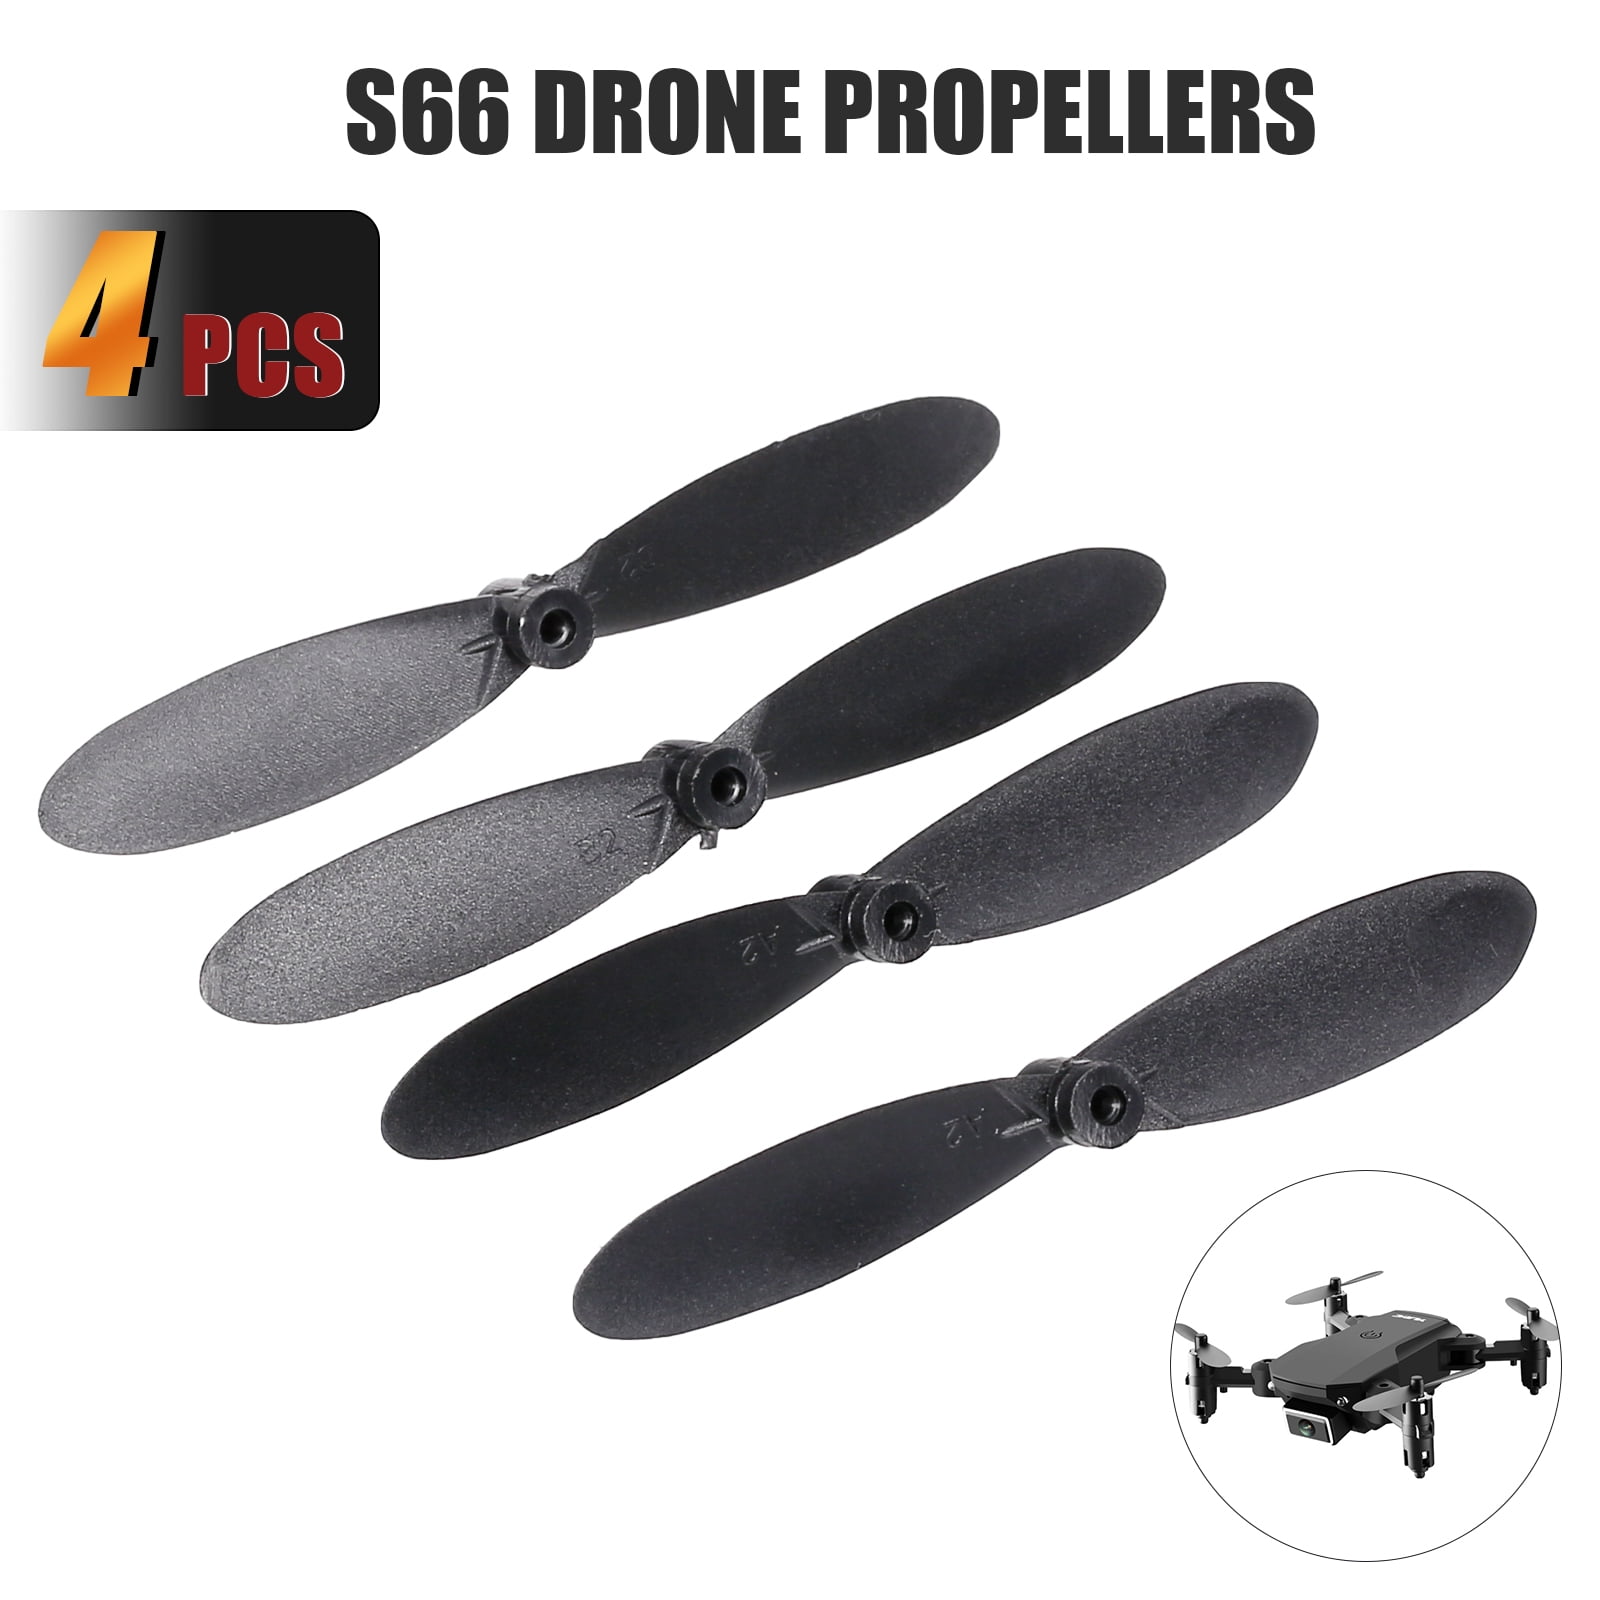 Replacement 5 Pack of Propellers Blades DM007 X007 Quadcopter Spy Drone 